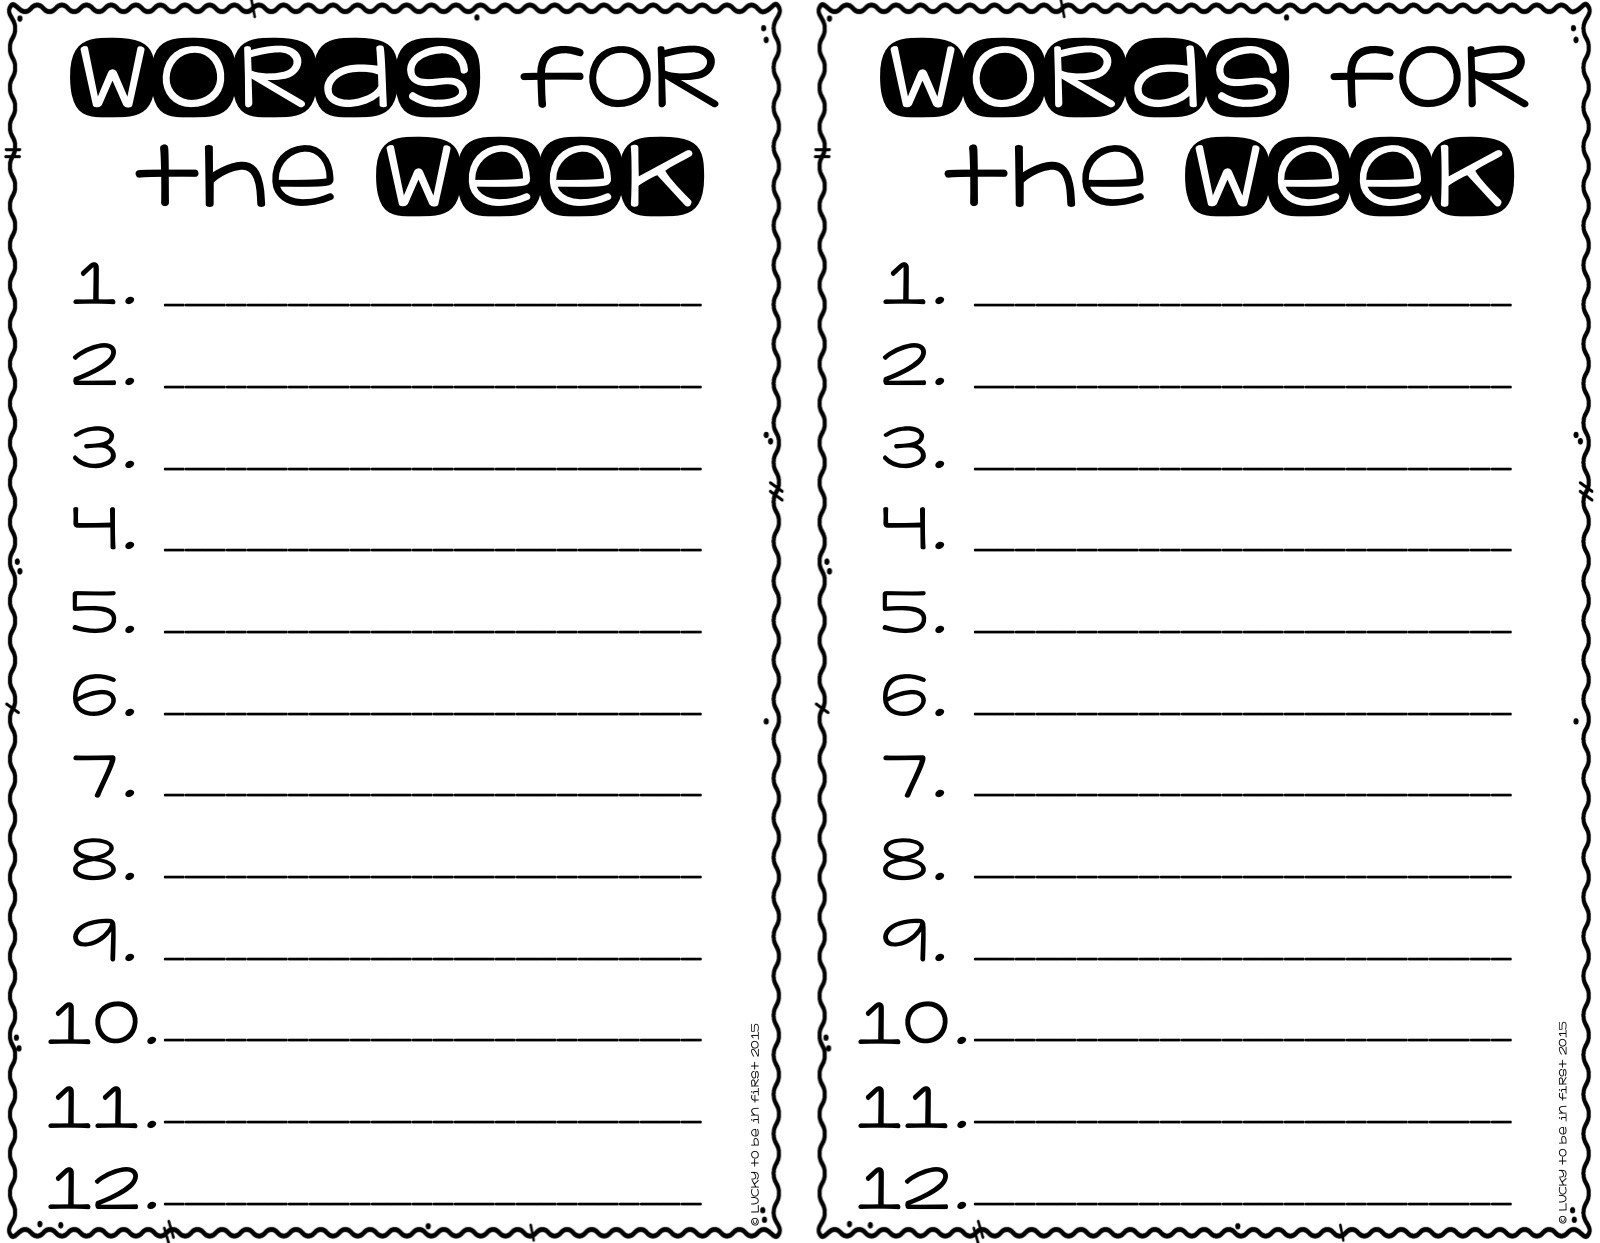 Words for the Week Daily 5 Word Work black and white version for teachers | Lucky Learning with Molly Lynch 